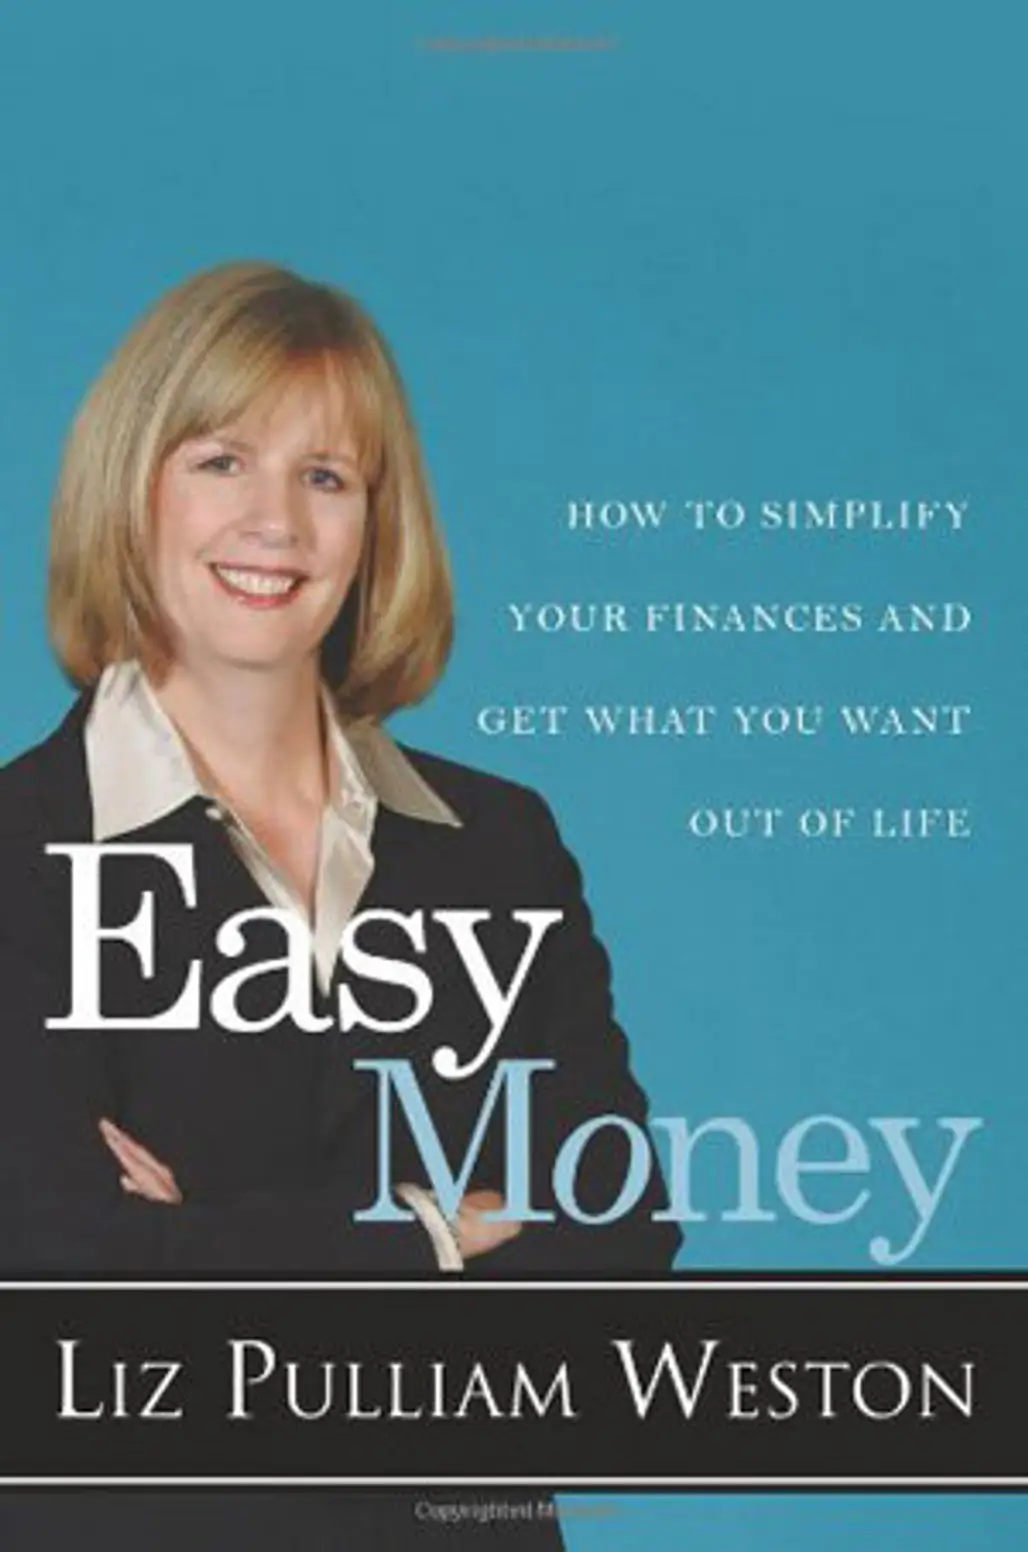 Easy Money-Simplify Your Finances and Get What You Want out of Life by Liz Pulliman Weston